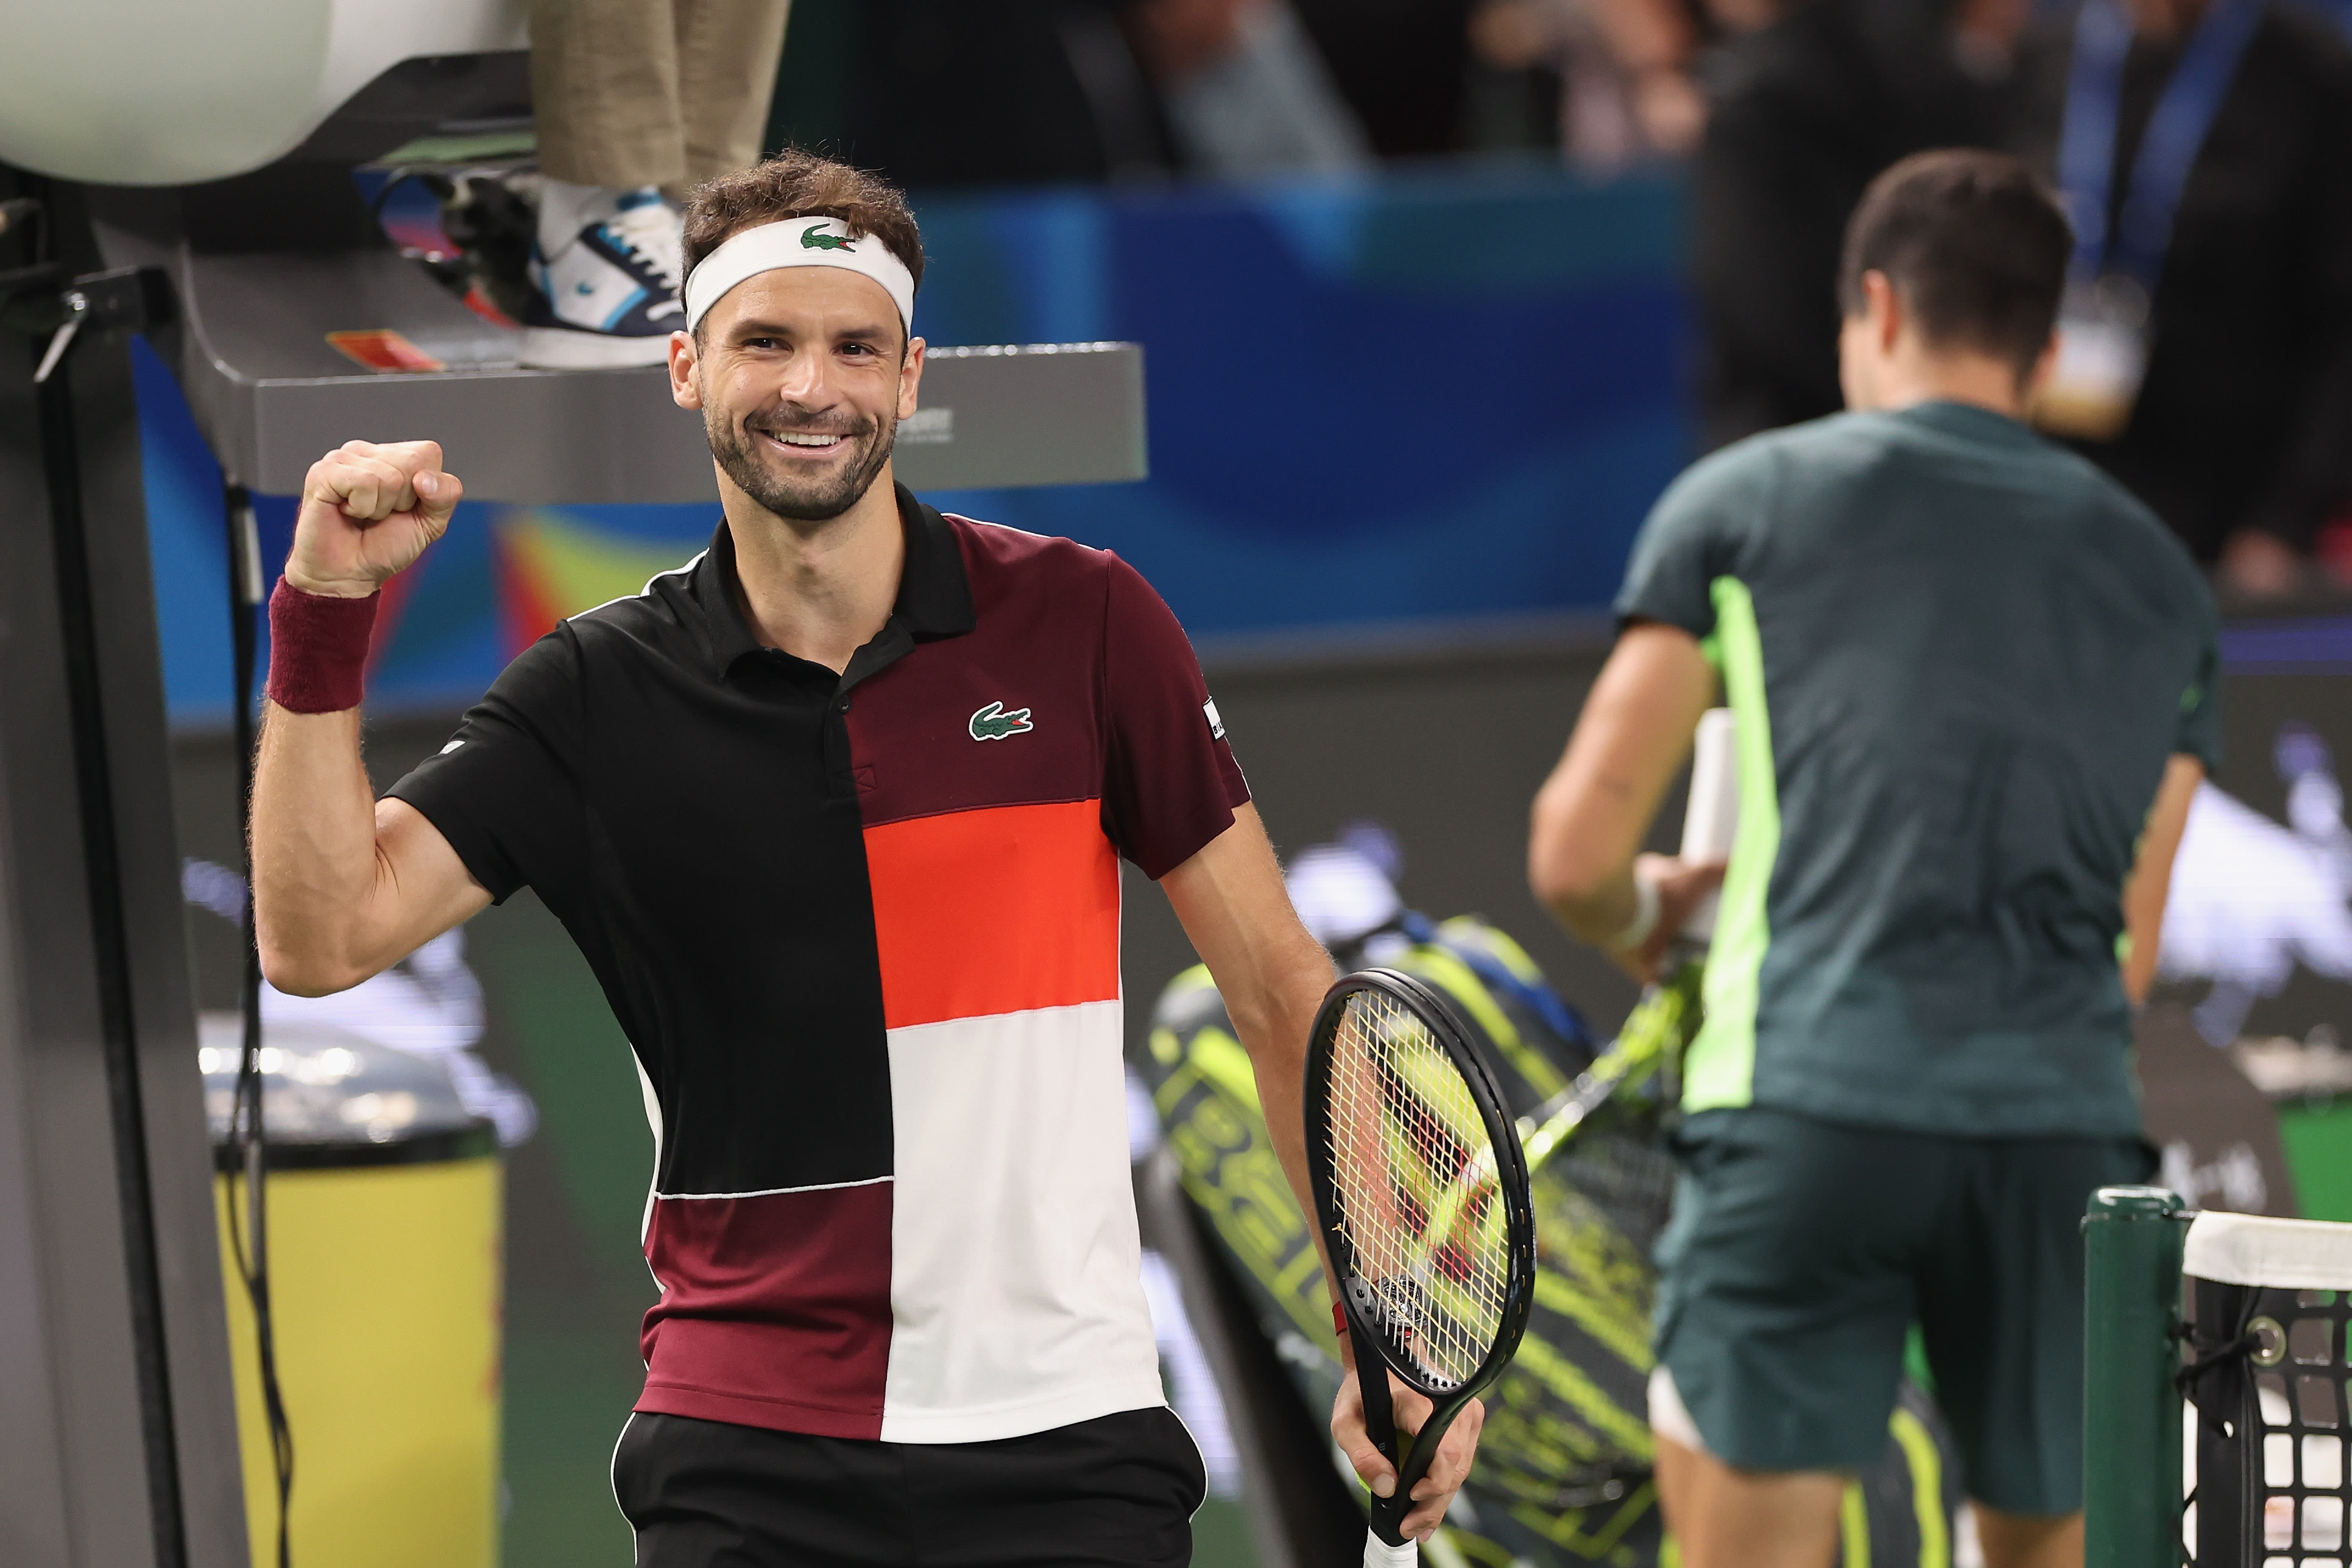 Shanghai Masters 2023 tennis, TV channel and live stream